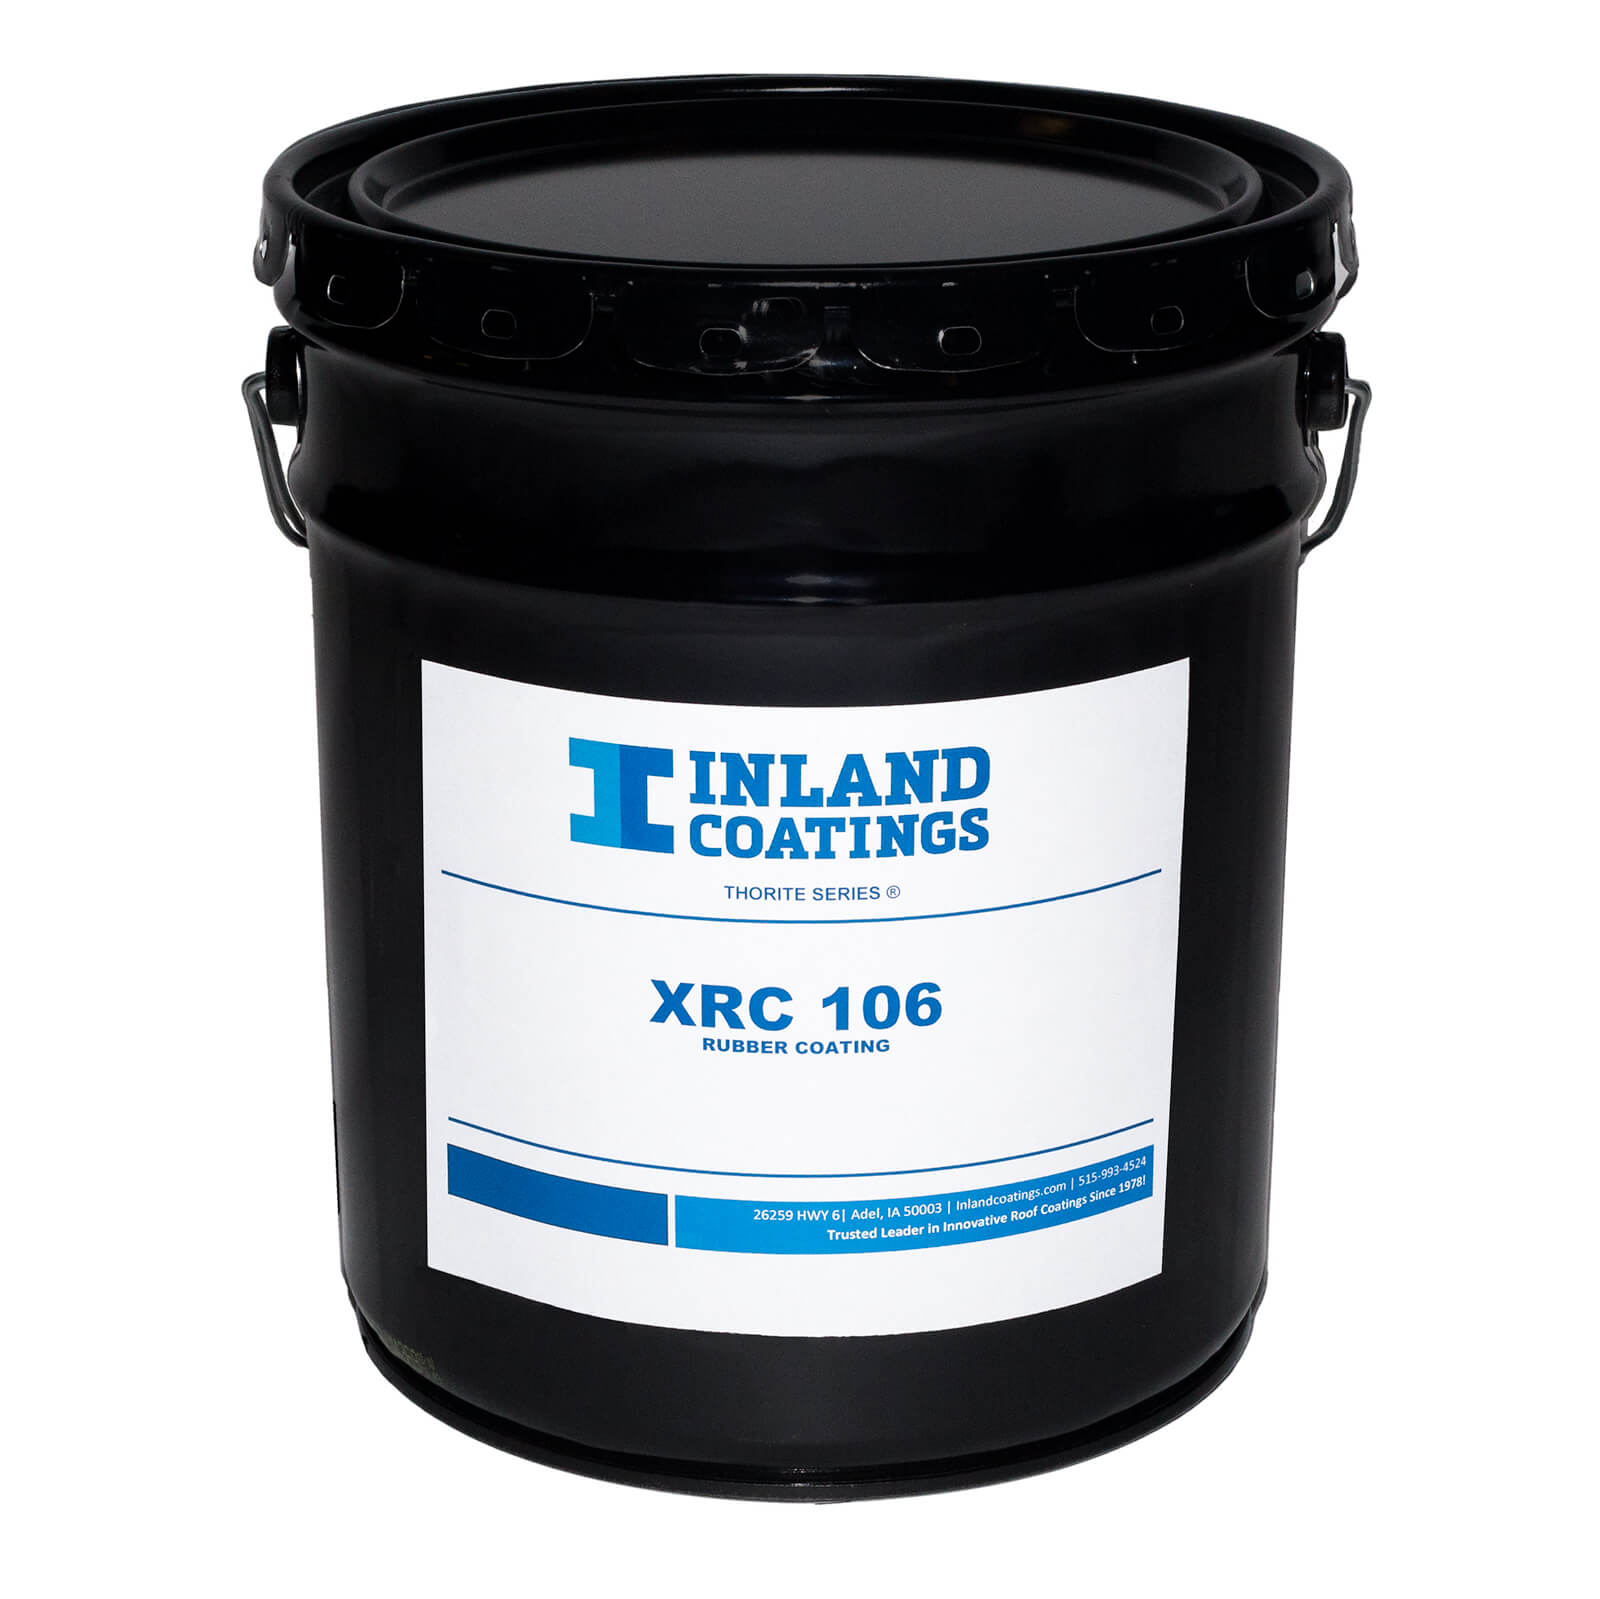 A bucket of Inland's XRC-106 Thorite Series Rubber Coating.